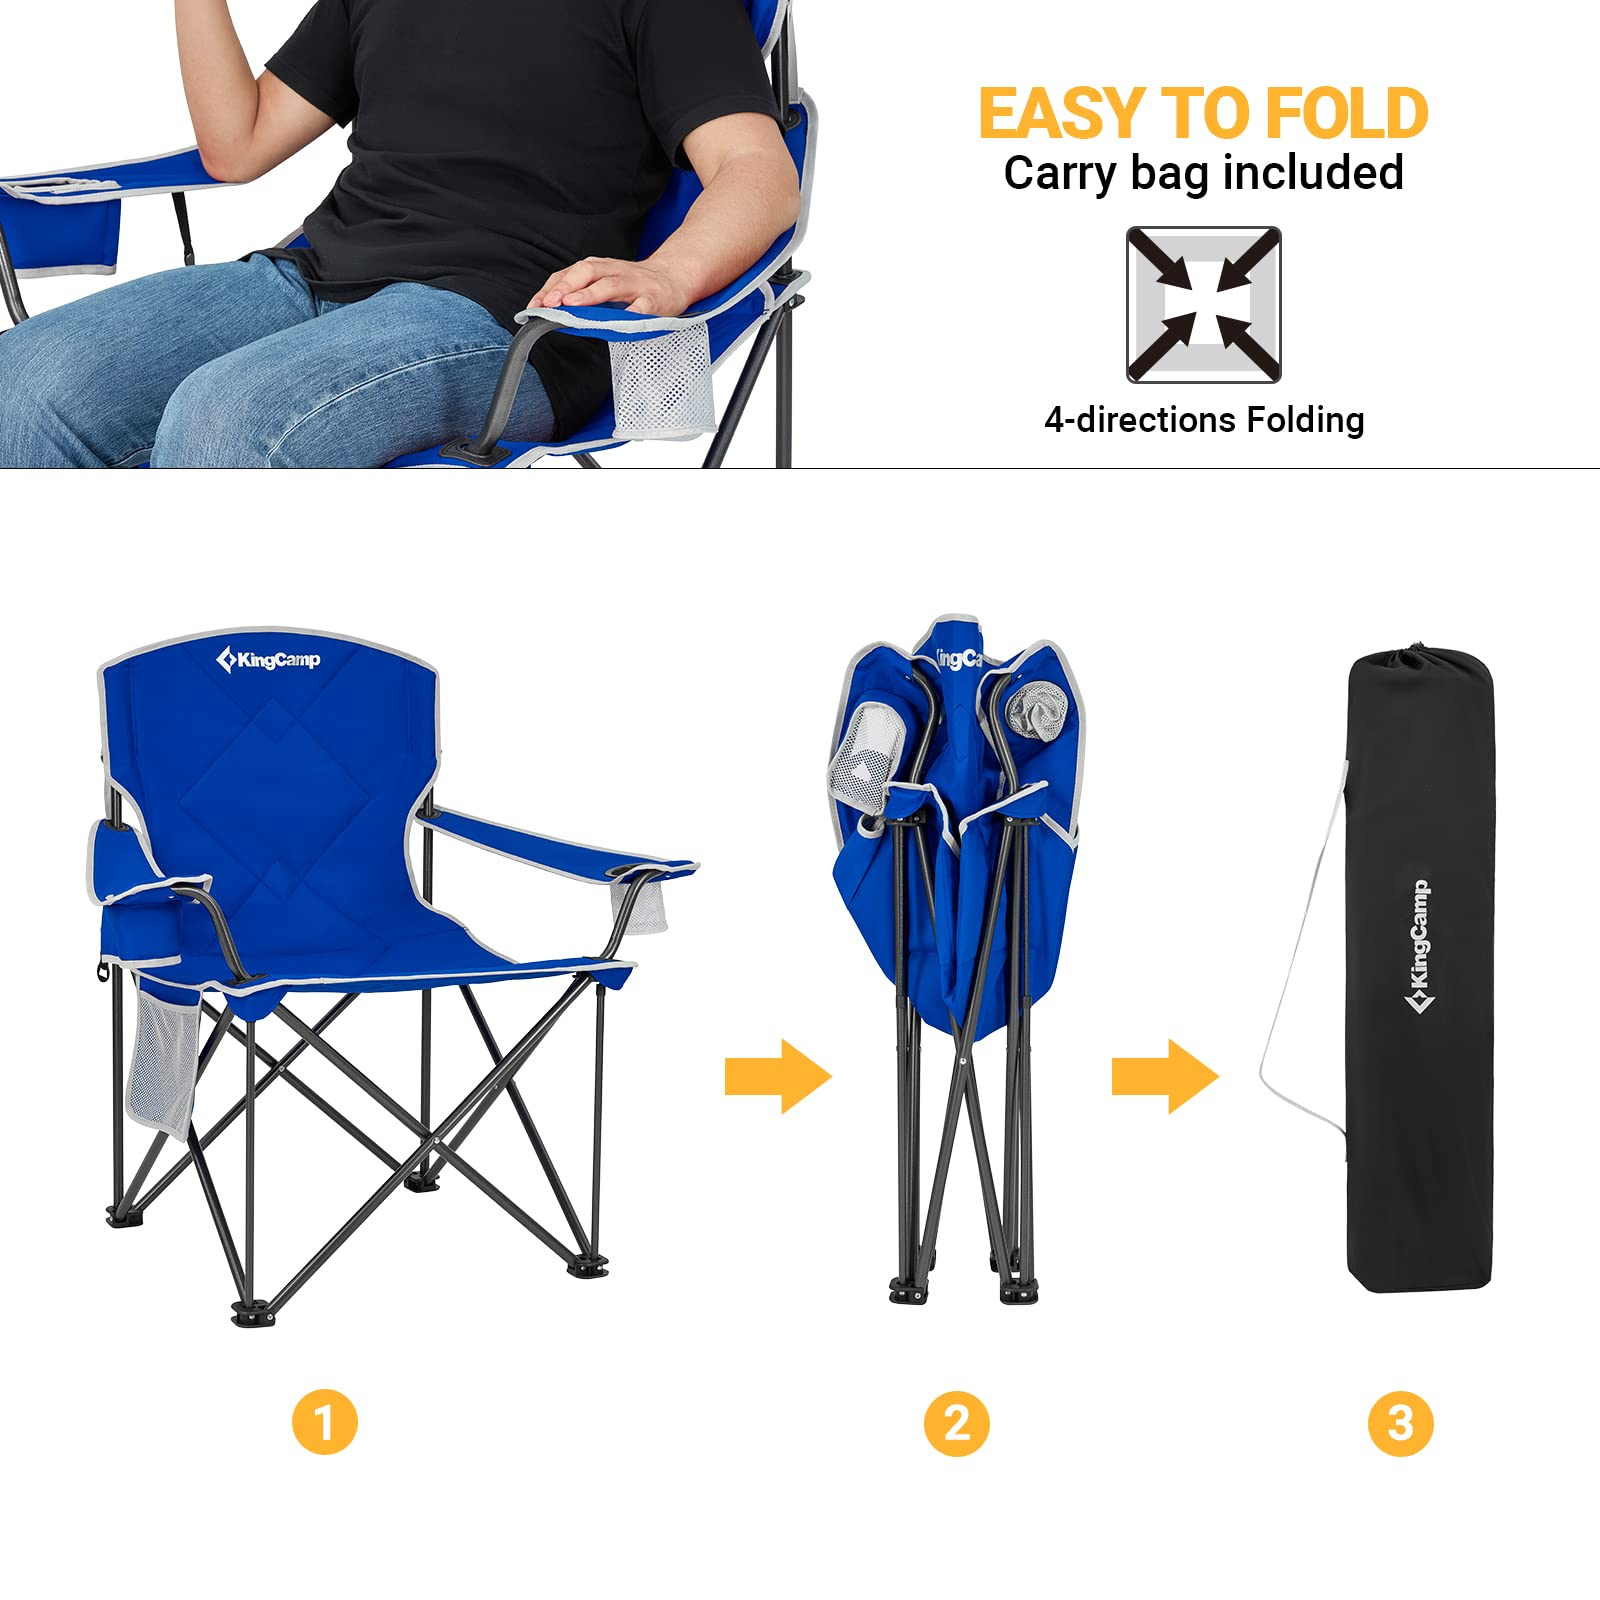 KingCamp Oversized Folding Camping Chairs